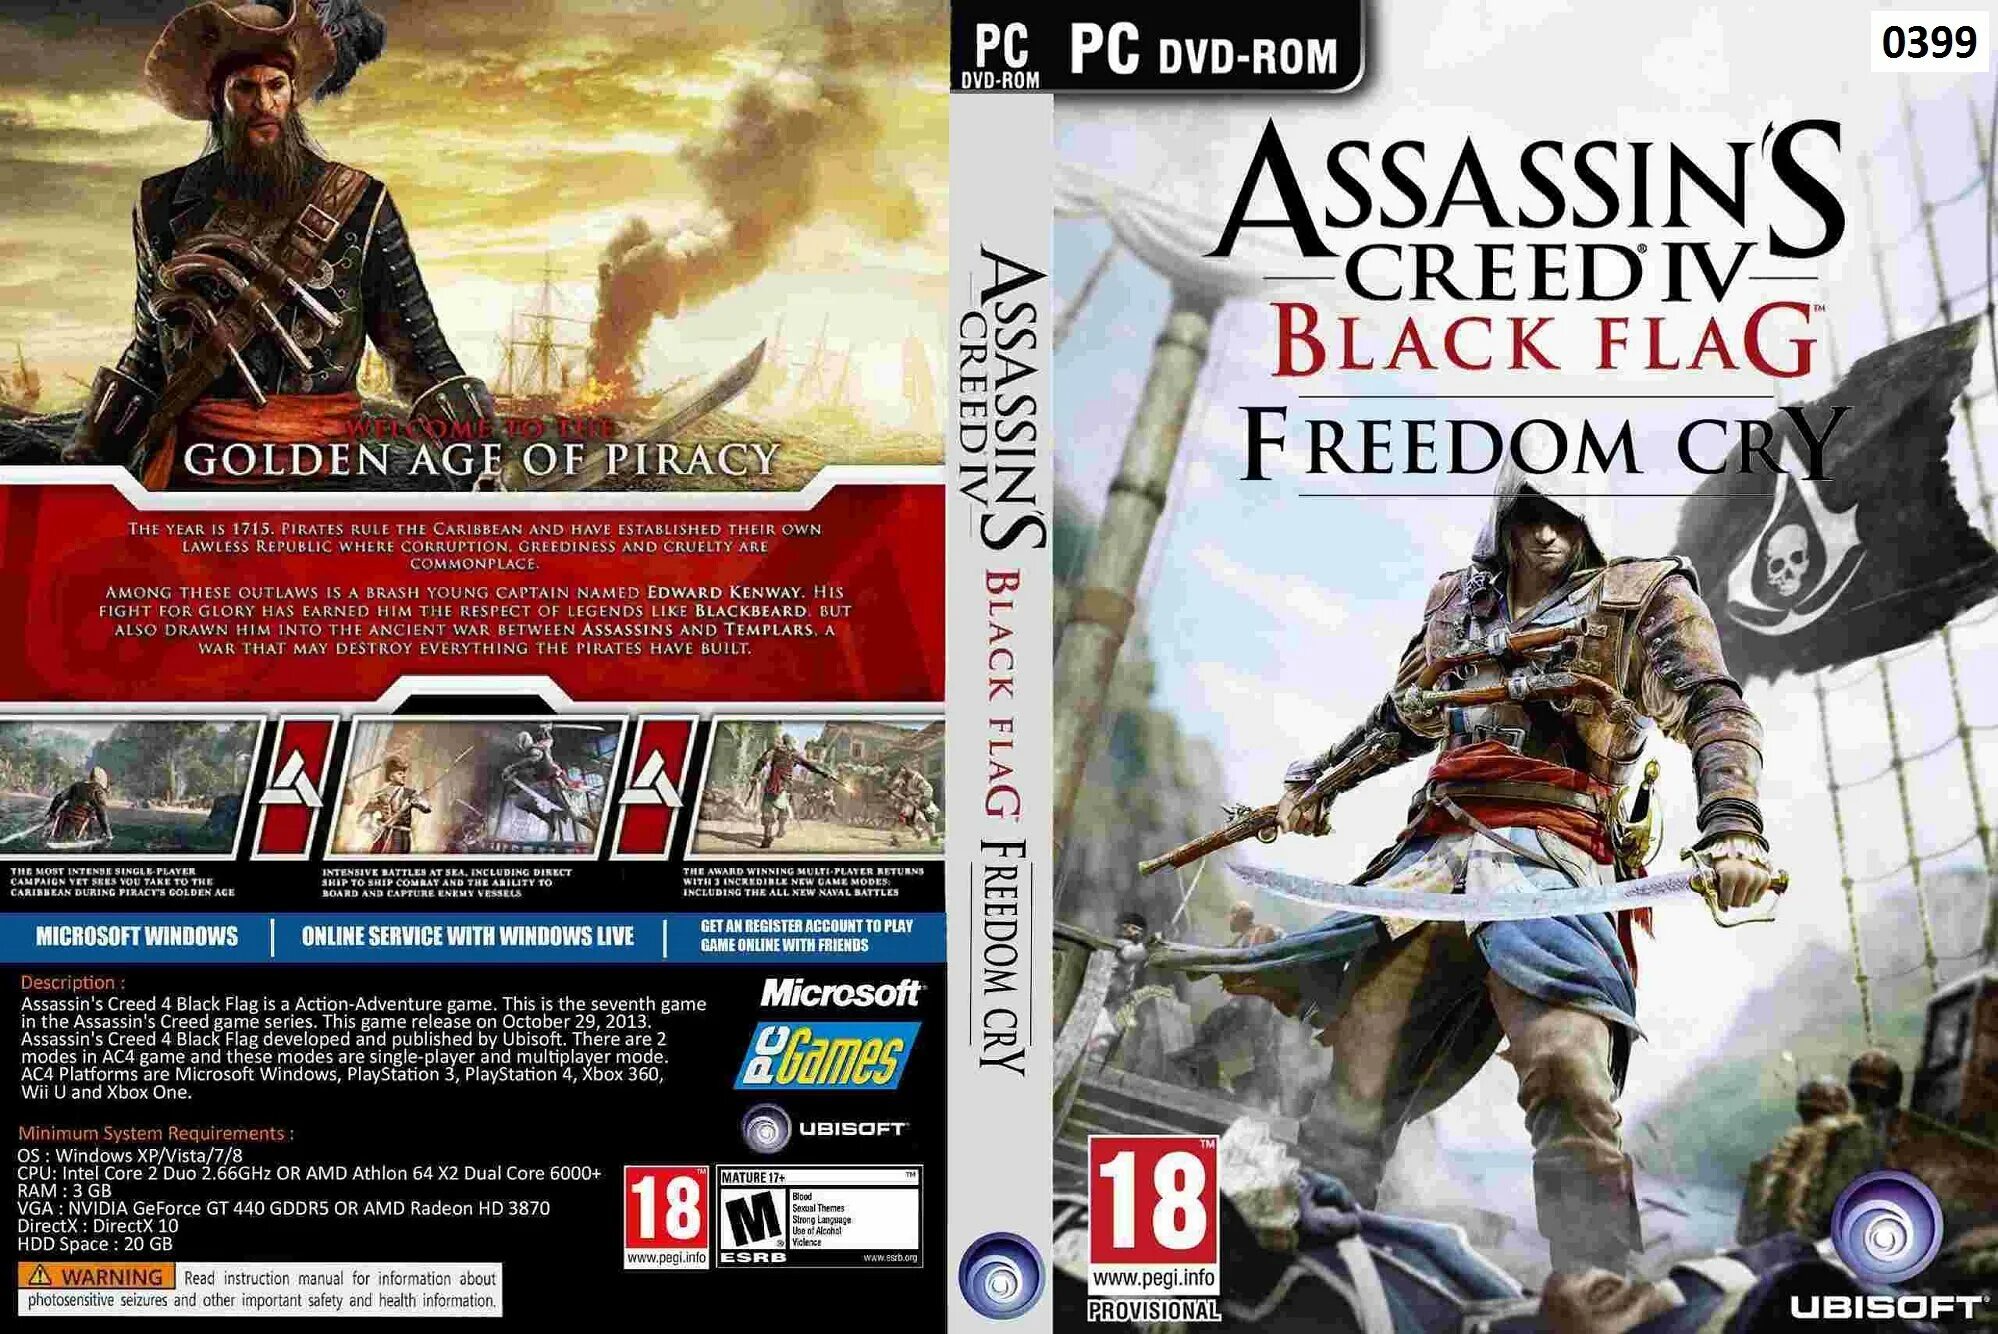 Assassins Creed 4 ps3 обложка. Диск ассасин Крид 2 ps3. Assassins Creed 2 Xbox 360 пиратский диск. Ассасин Крид 3 диск. Ассасин игры пс4